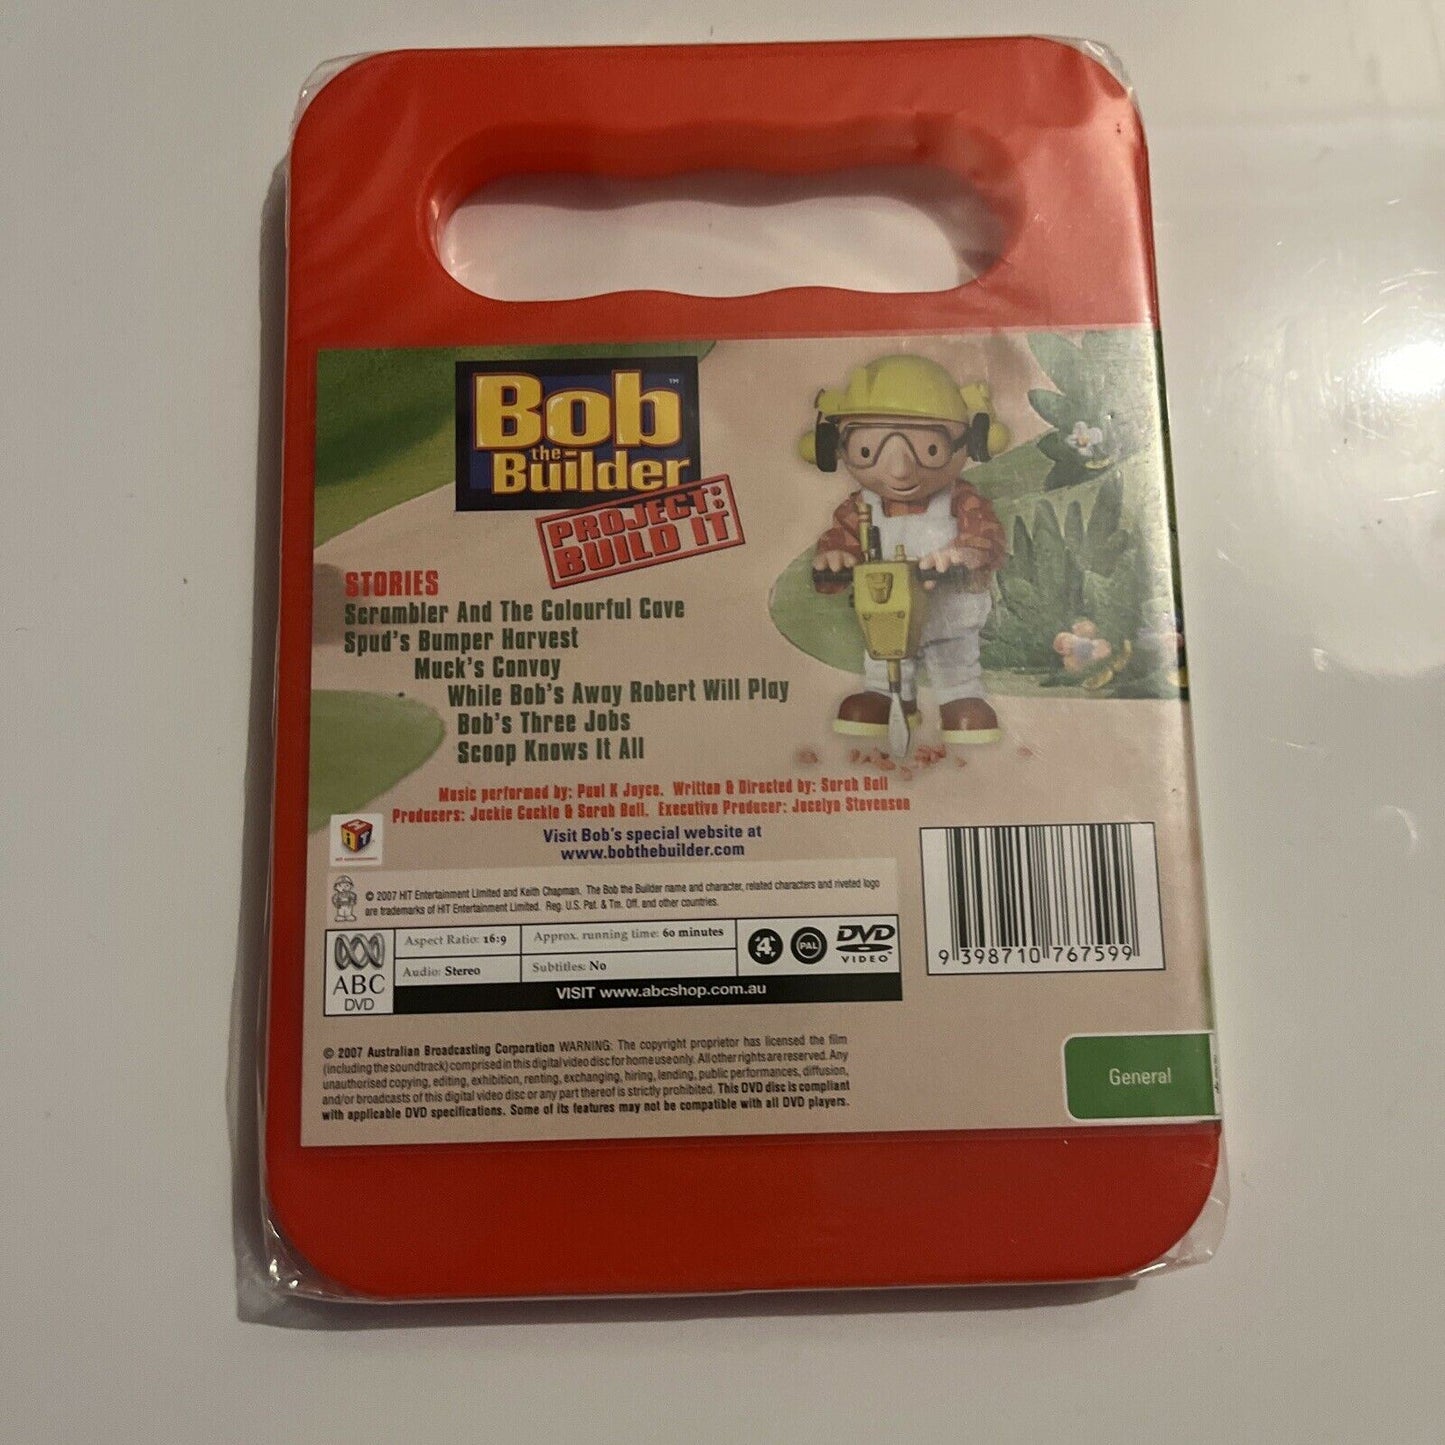 *New Sealed* Bob The Builder - Project Build It Muck's Convoy (DVD,2006) Region4